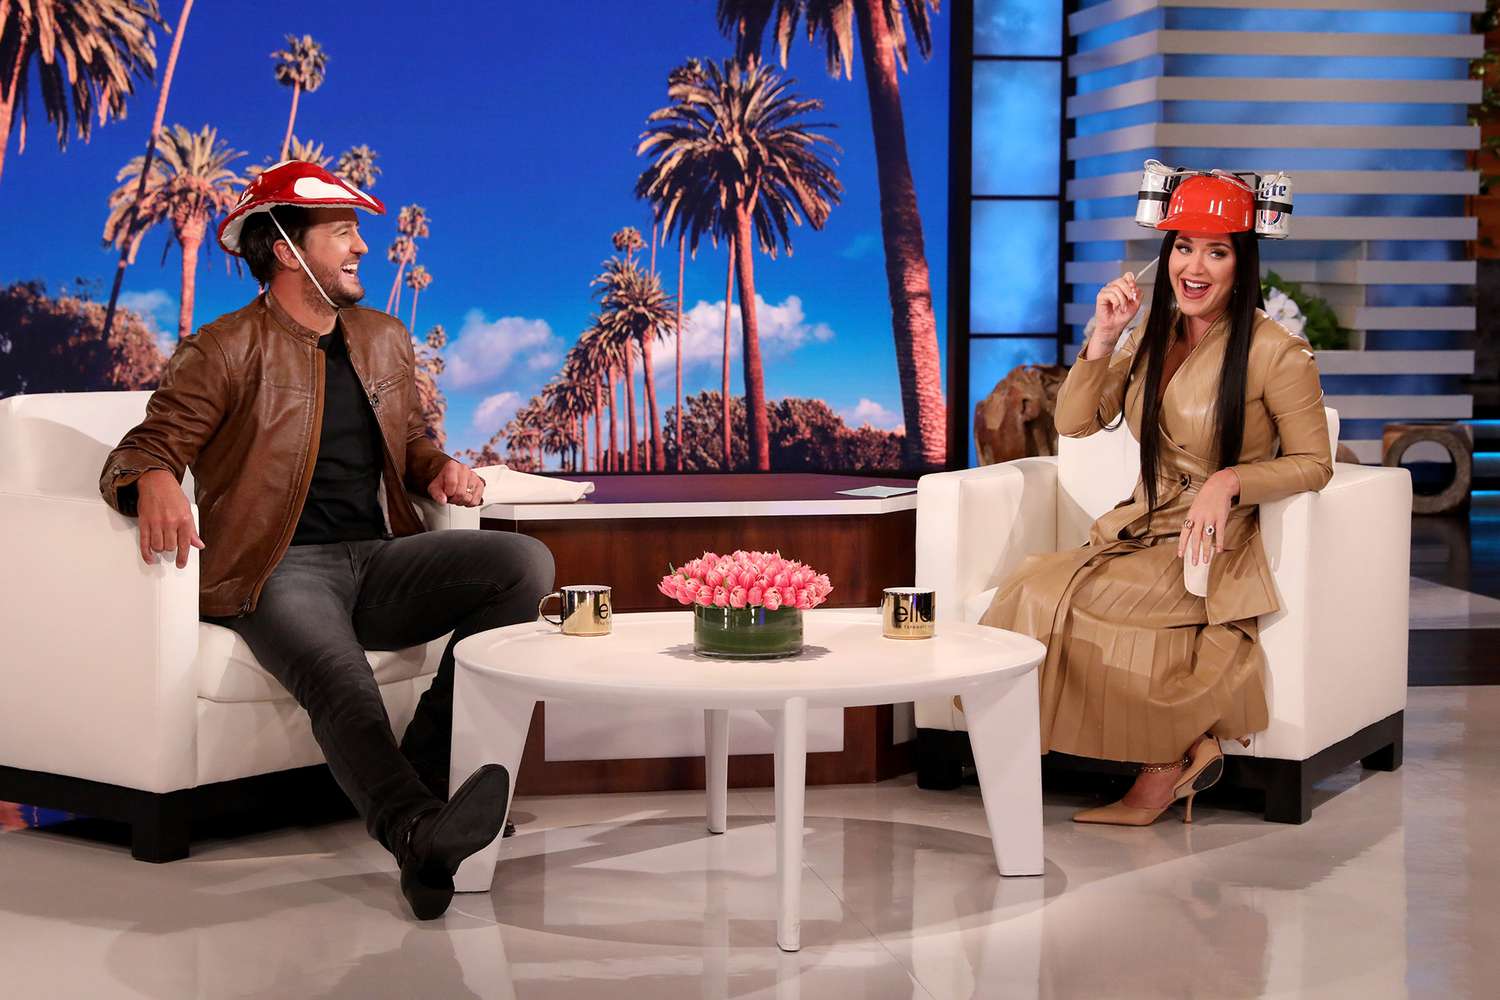 International superstar Katy Perry fills in as guest host on “The Ellen DeGeneres Show,” airing on her birthday, Monday, October 25. The new mom explains how life with her one-year-old daughter, Daisy, is similar to being a pop star. Then, Katy welcomes her “American Idol” co-star Luke Bryan. Since they both have Las Vegas residencies, they share the taglines that best encapsulate their shows. The country singer also reveals he’s a huge fan of Elvis Presley and shows off his best impression of the music icon. Plus, Katy and Luke surprise each other with fun hats to wear to each other’s concerts! In this photo released by Warner Bros., a taping of "The Ellen DeGeneres Show" is seen at the Warner Bros. lot in Burbank, Calif. (Photo by Michael Rozman/Warner Bros.)